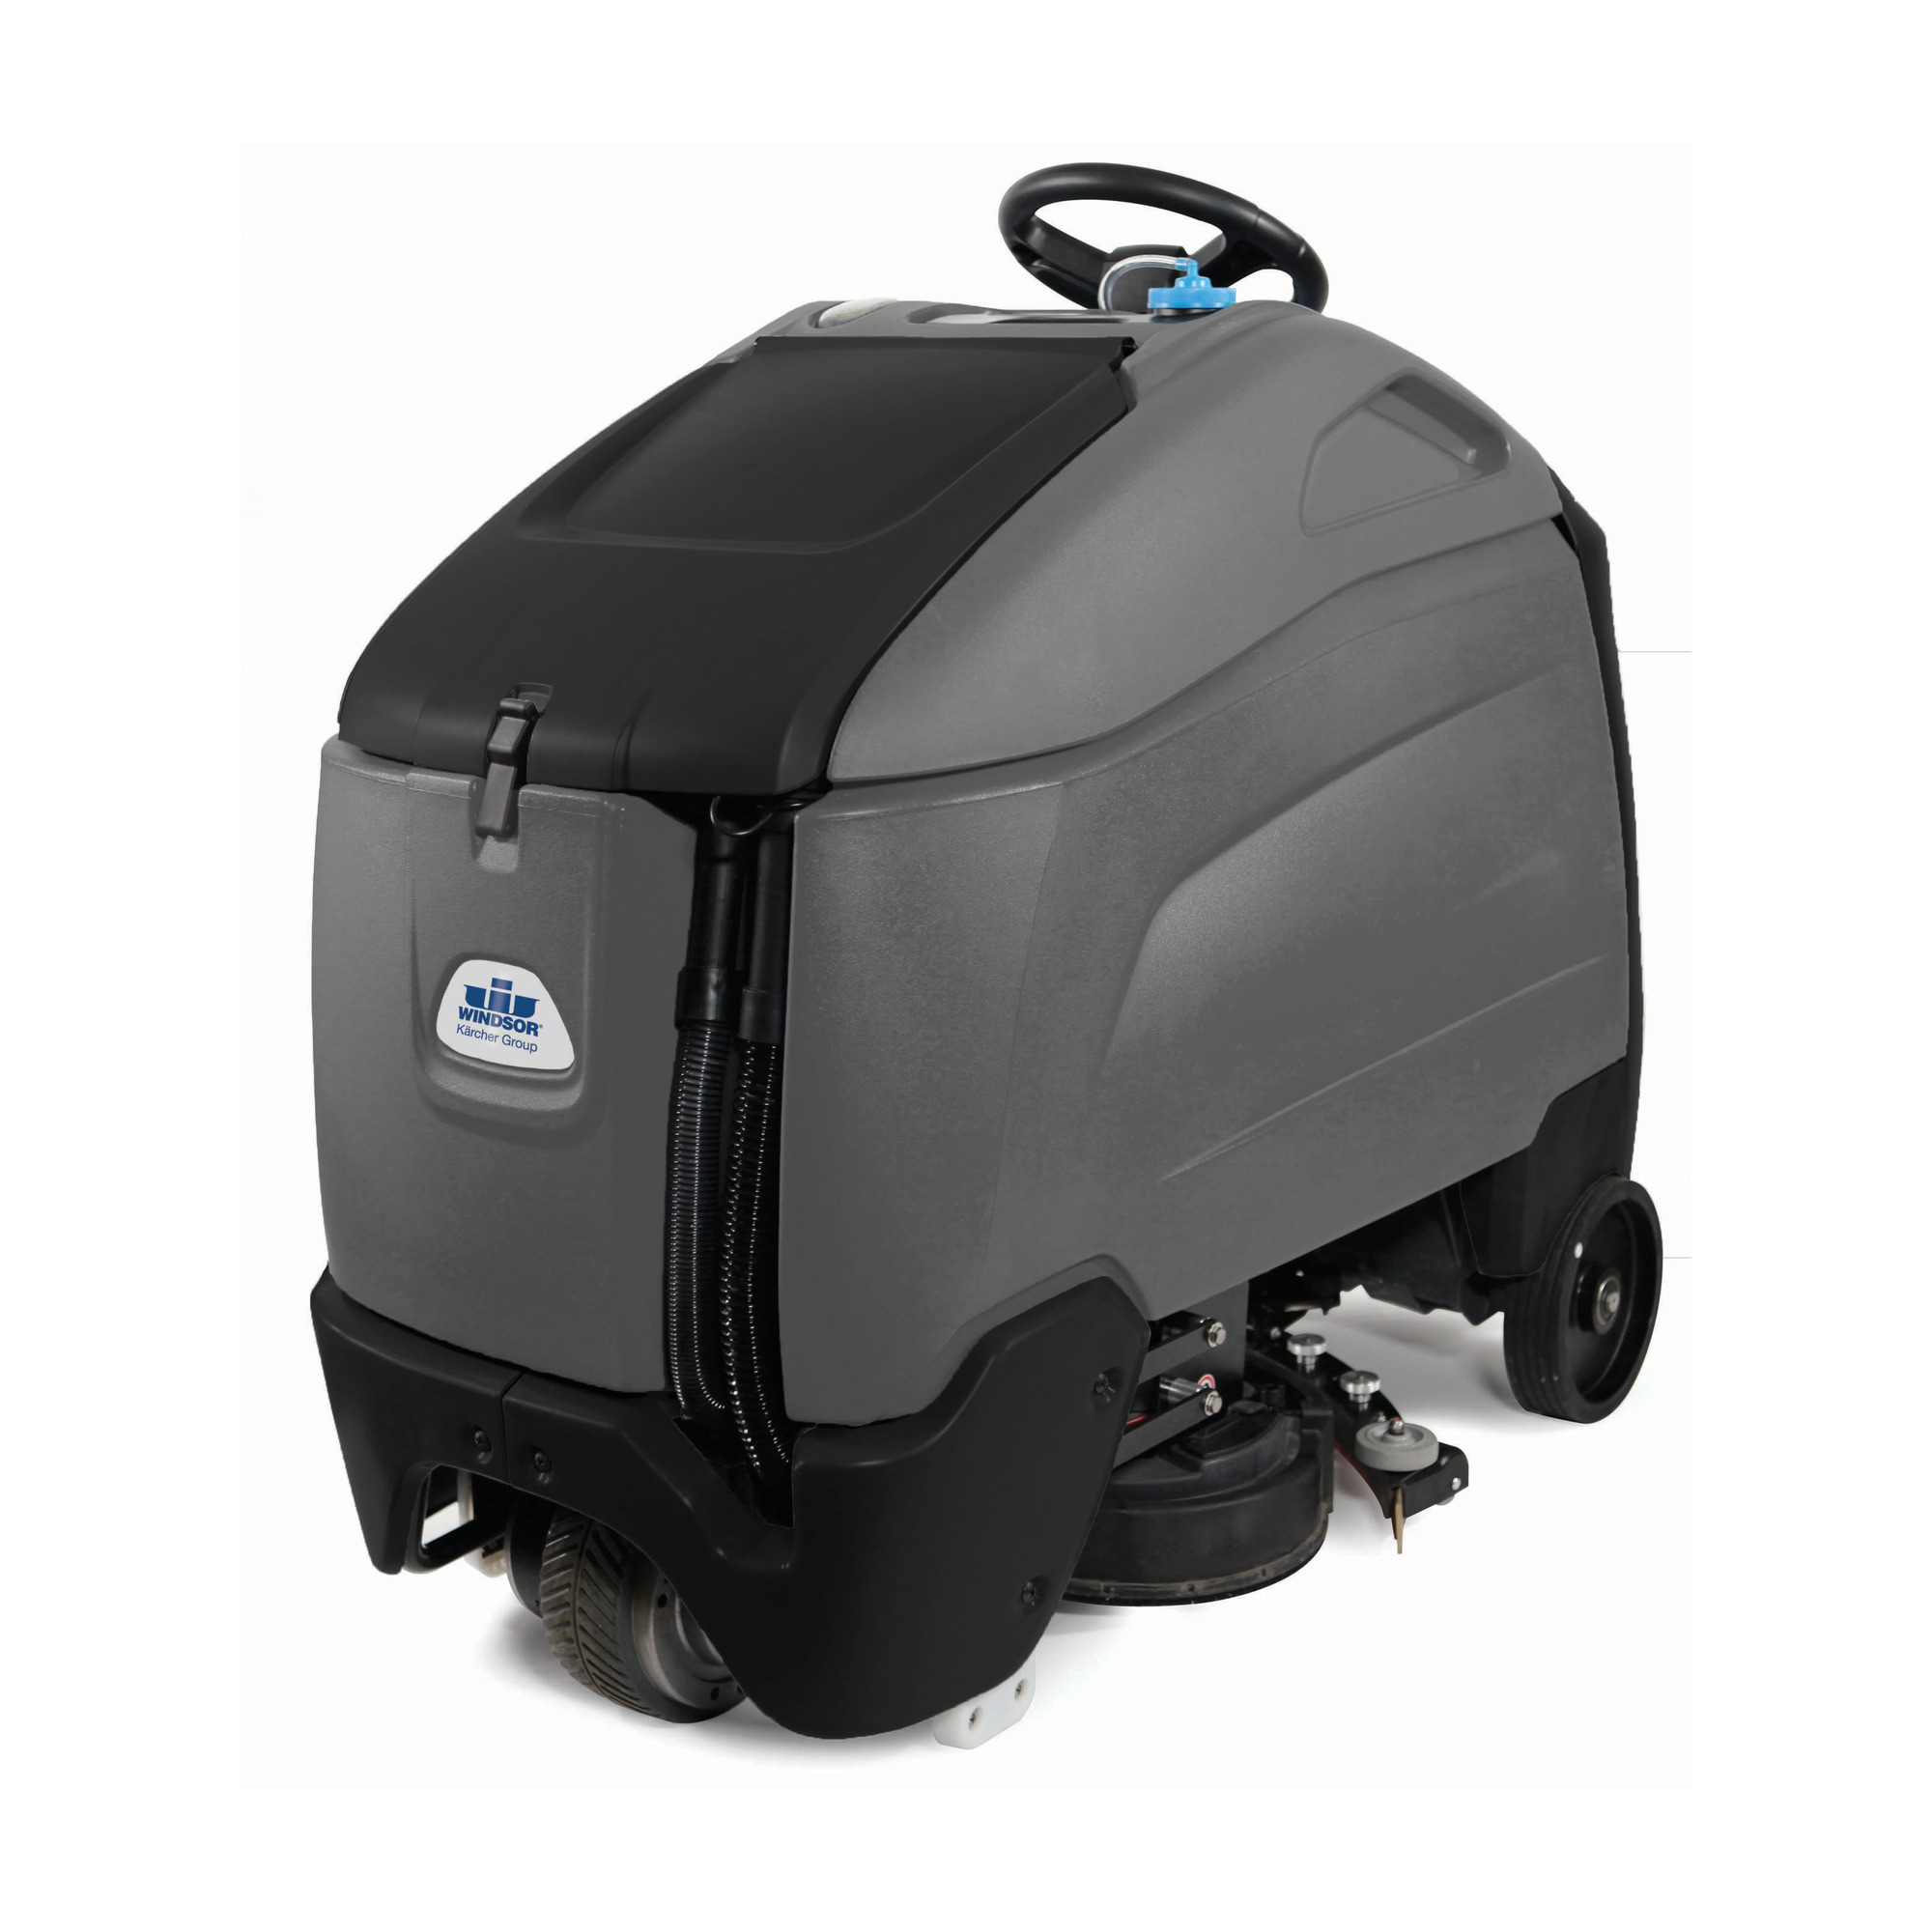 26&quot; CHARIOT 3 ISCRUB STANDON 
SCRUBBER - 25GAL SOLUTION &amp; 
27GAL RECOVERY TANKS - SHELF
CHARGER, 225AH LA, PAD
DRIVER, 36V 